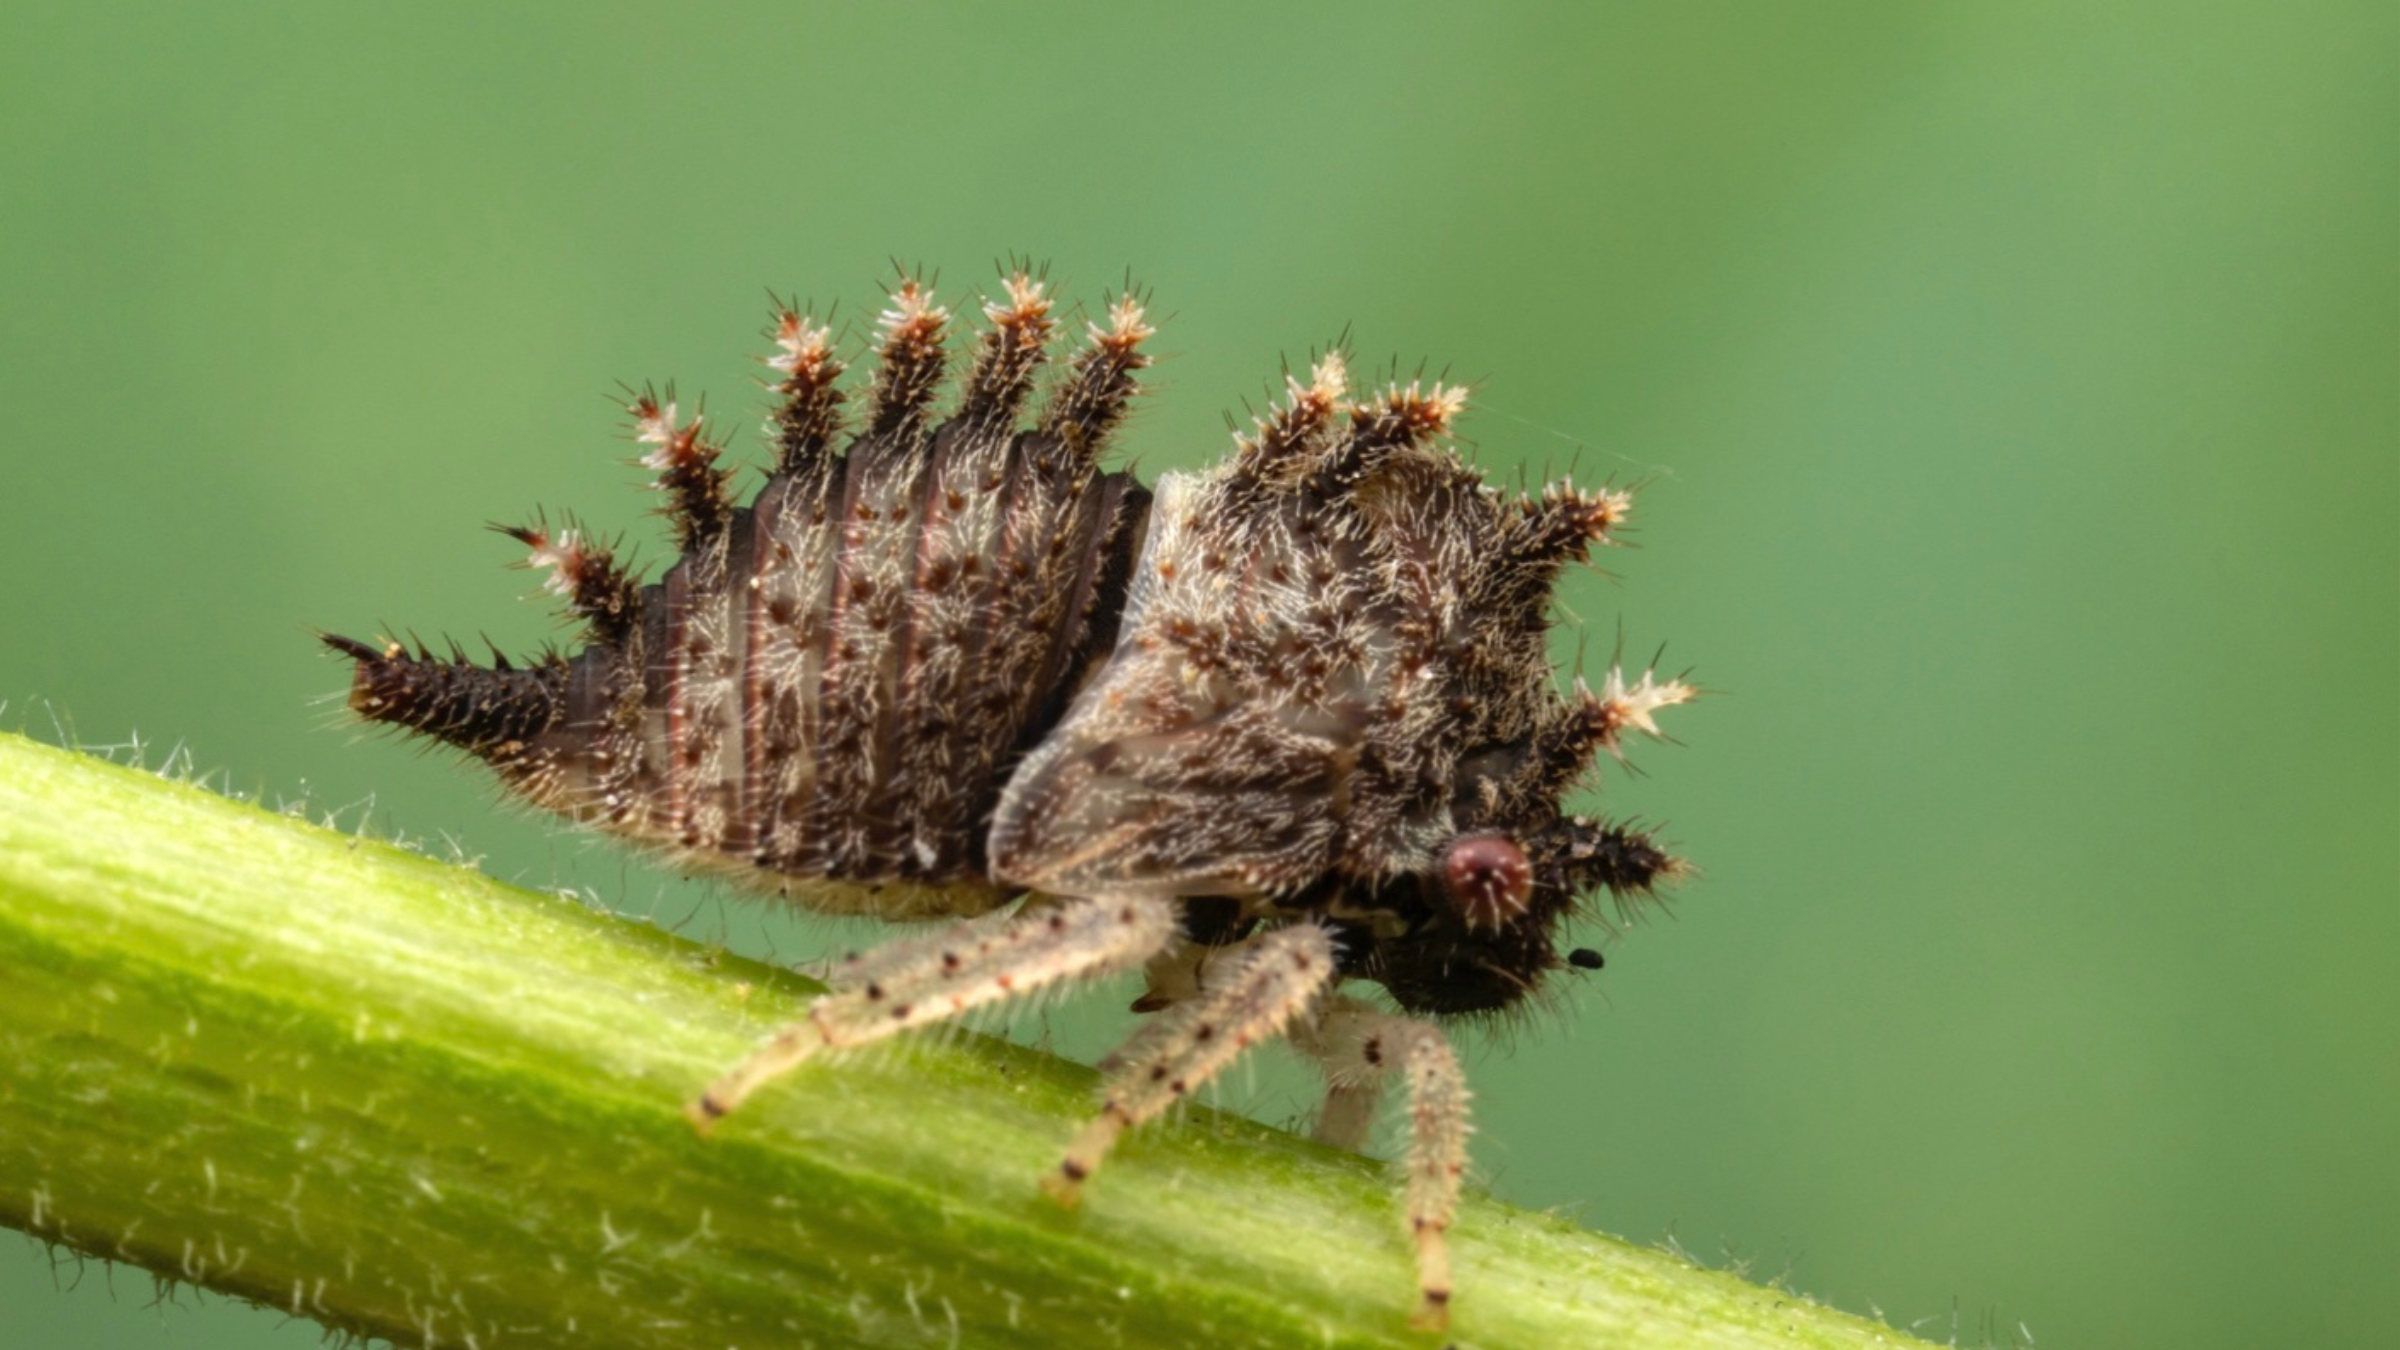 A young treehopper photographed at the Brackenridge Field Laboratory polllinator garden is one of the insects that inspired a scientist-musician collaboraiton. Credit: Alex Wild